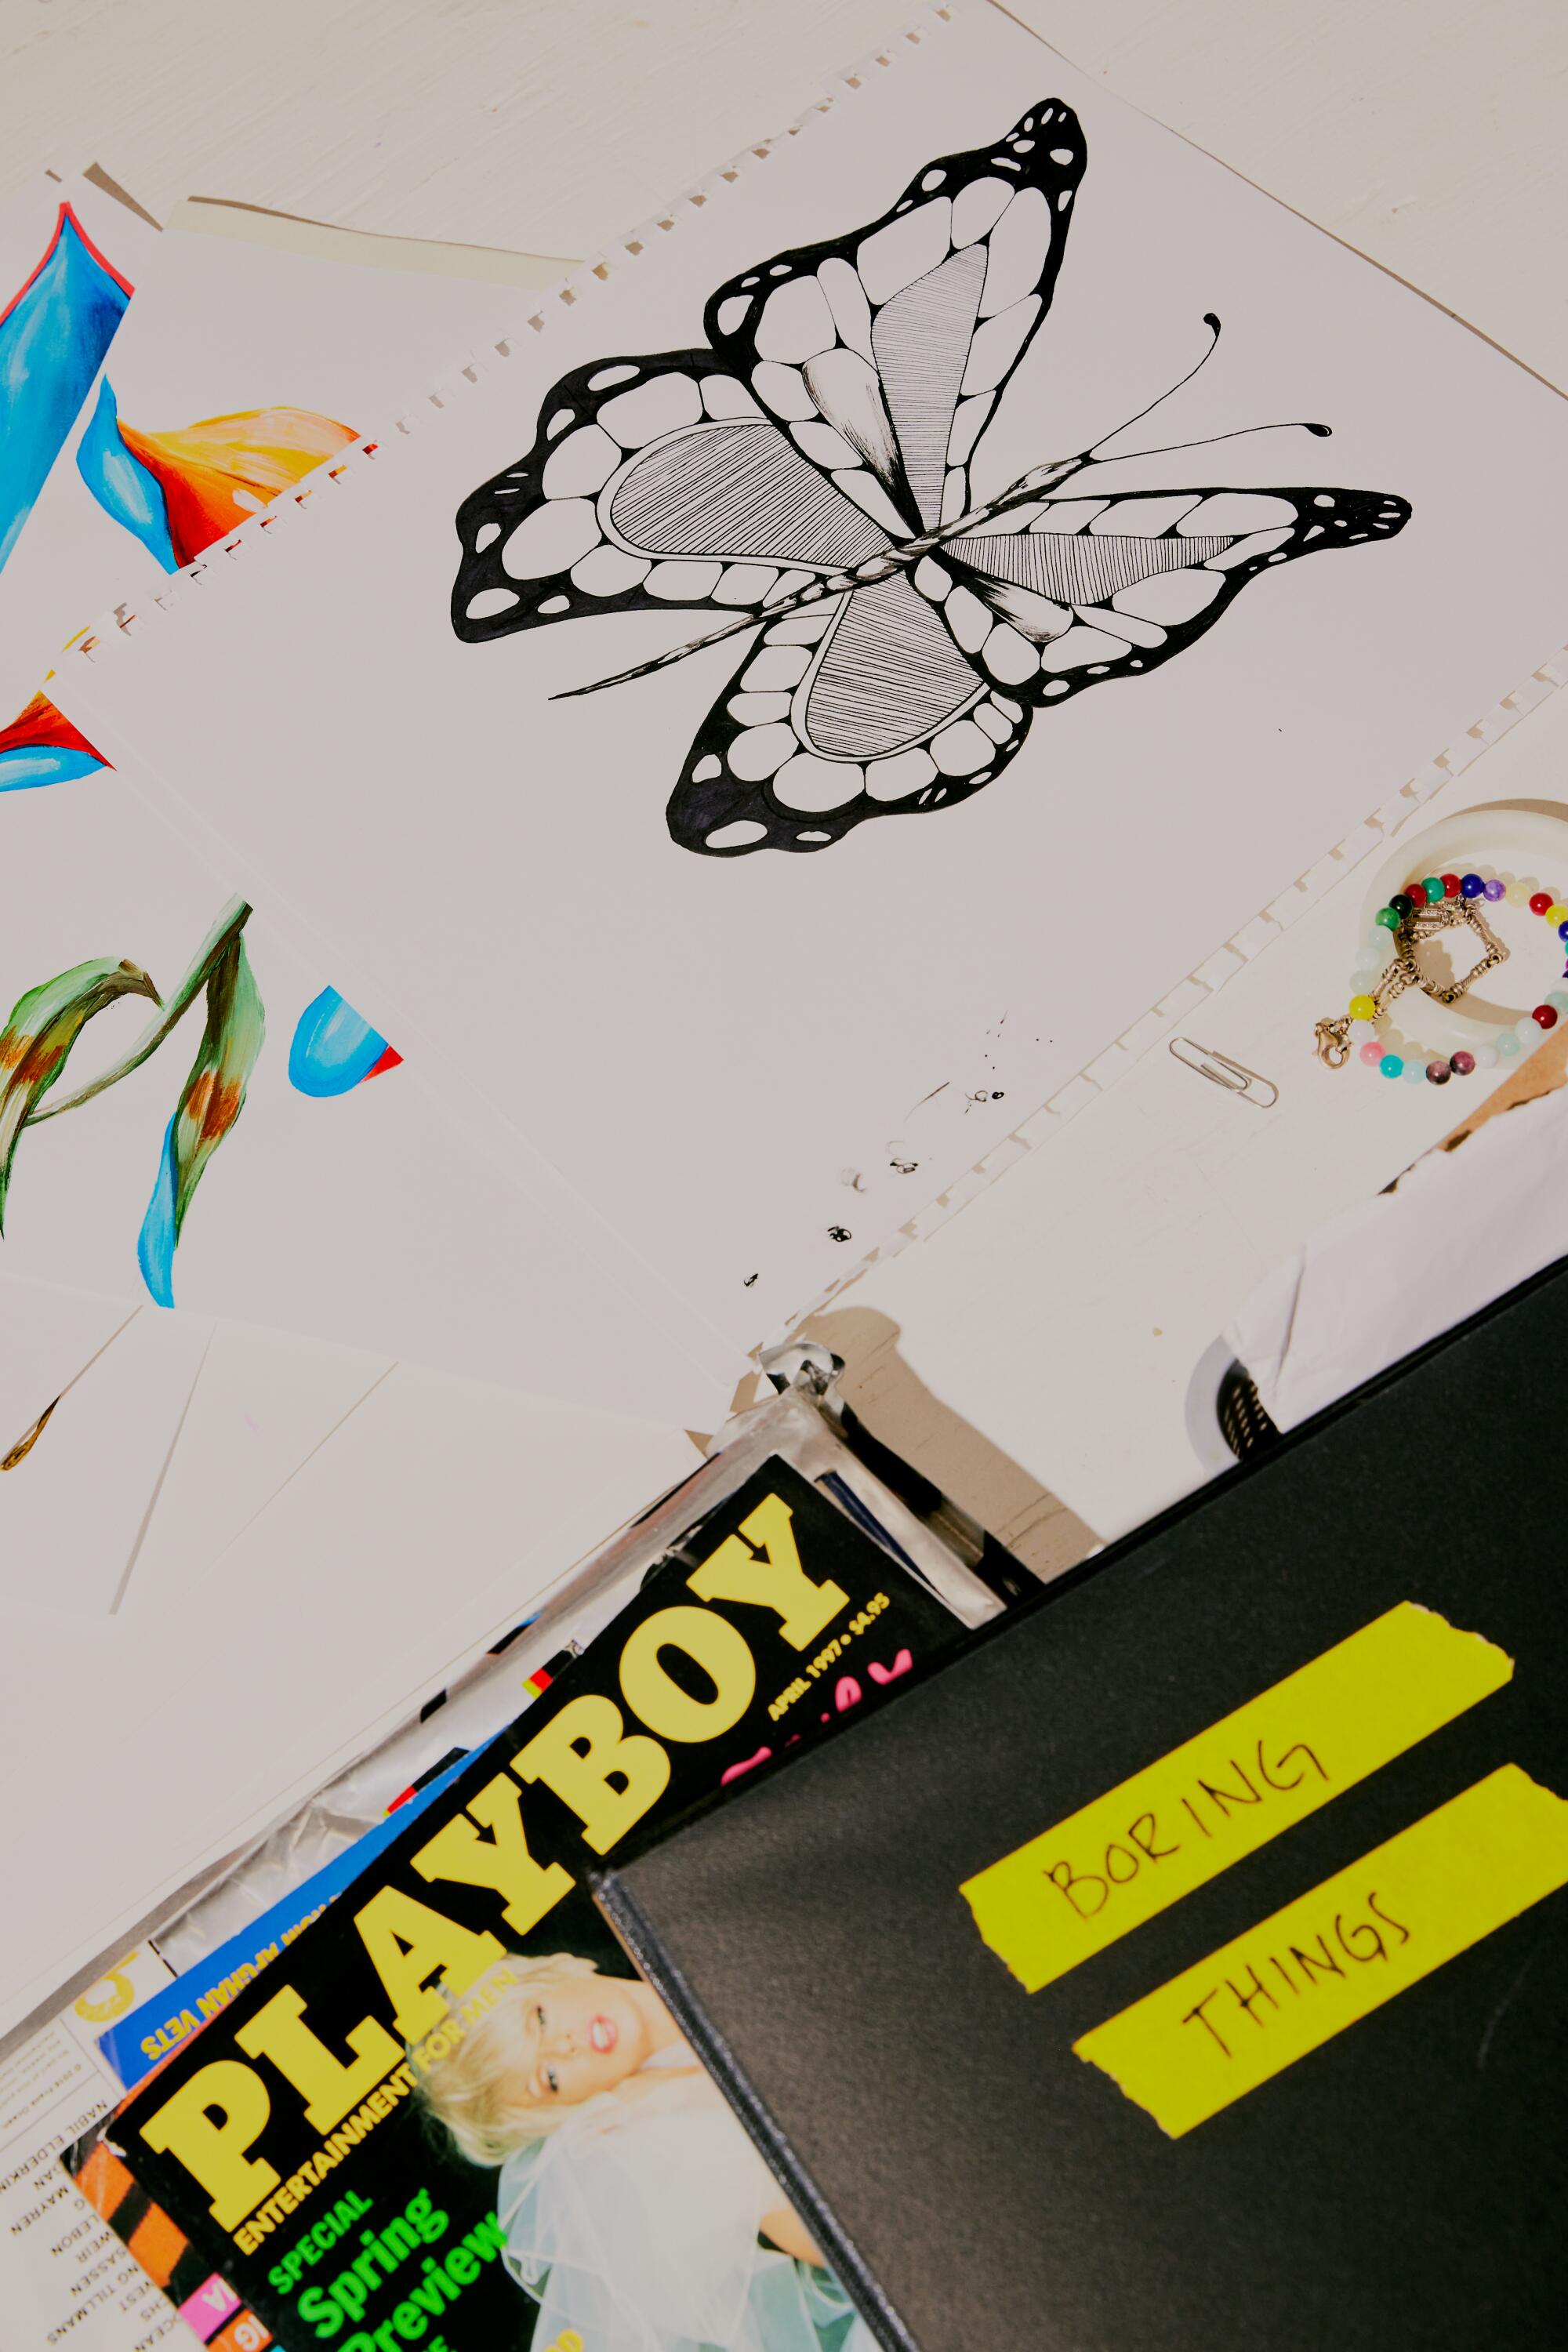 A drawing of a butterfly, a Playboy magazine and a folder labeled "Boring Things."